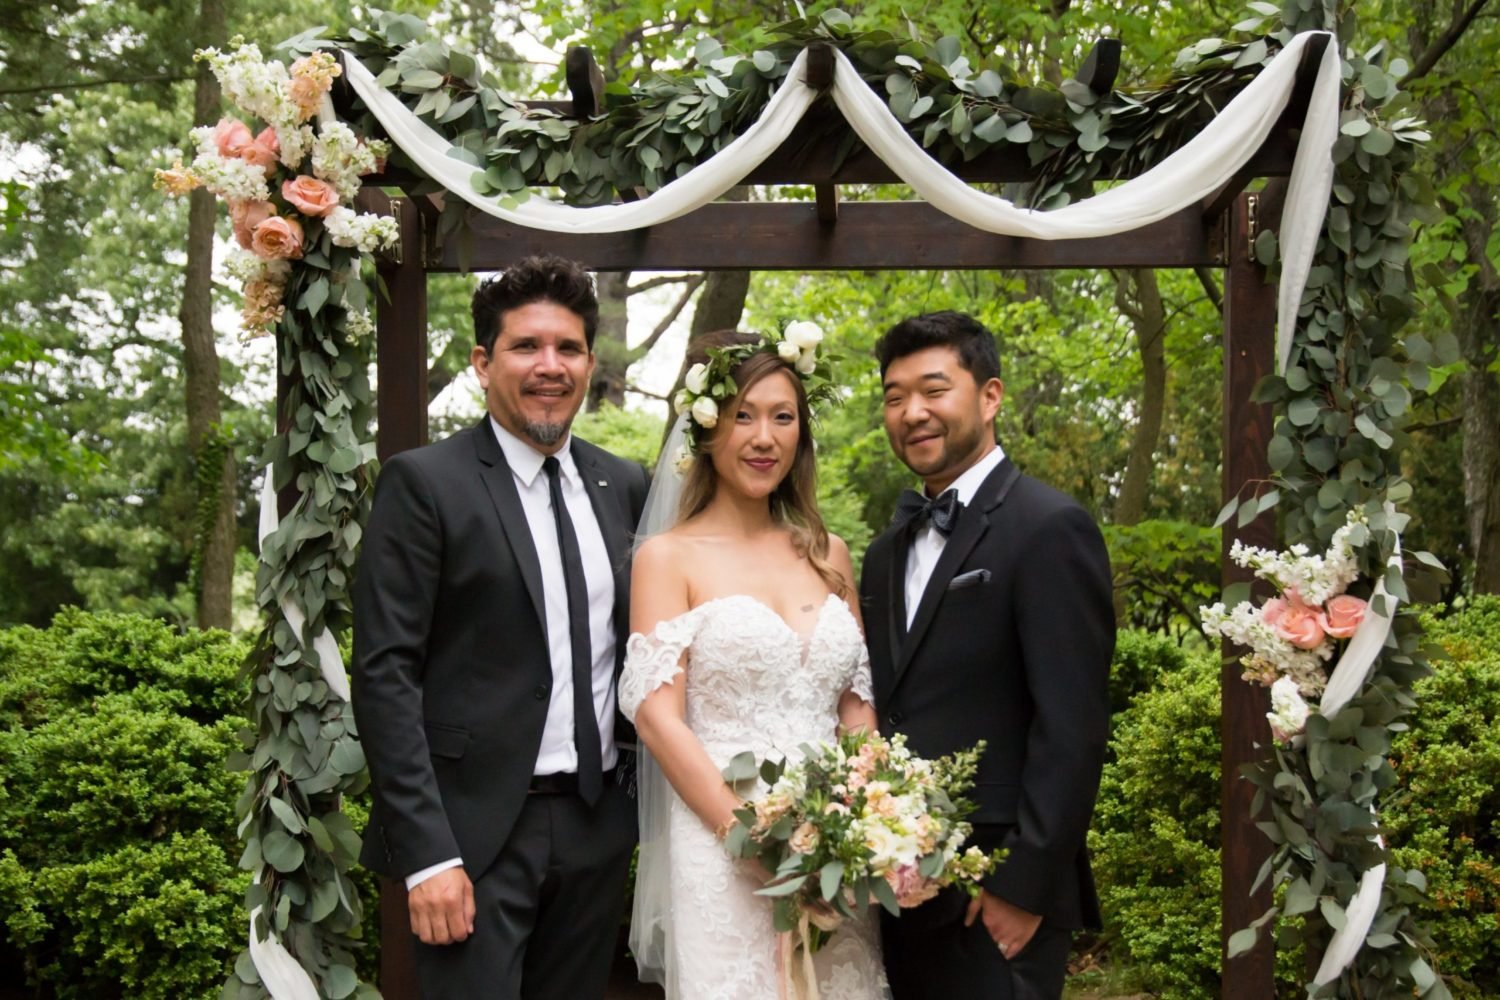 Rob Garza Thievery Corporation wedding Woodend Sanctuary Chevy Chase Maryland